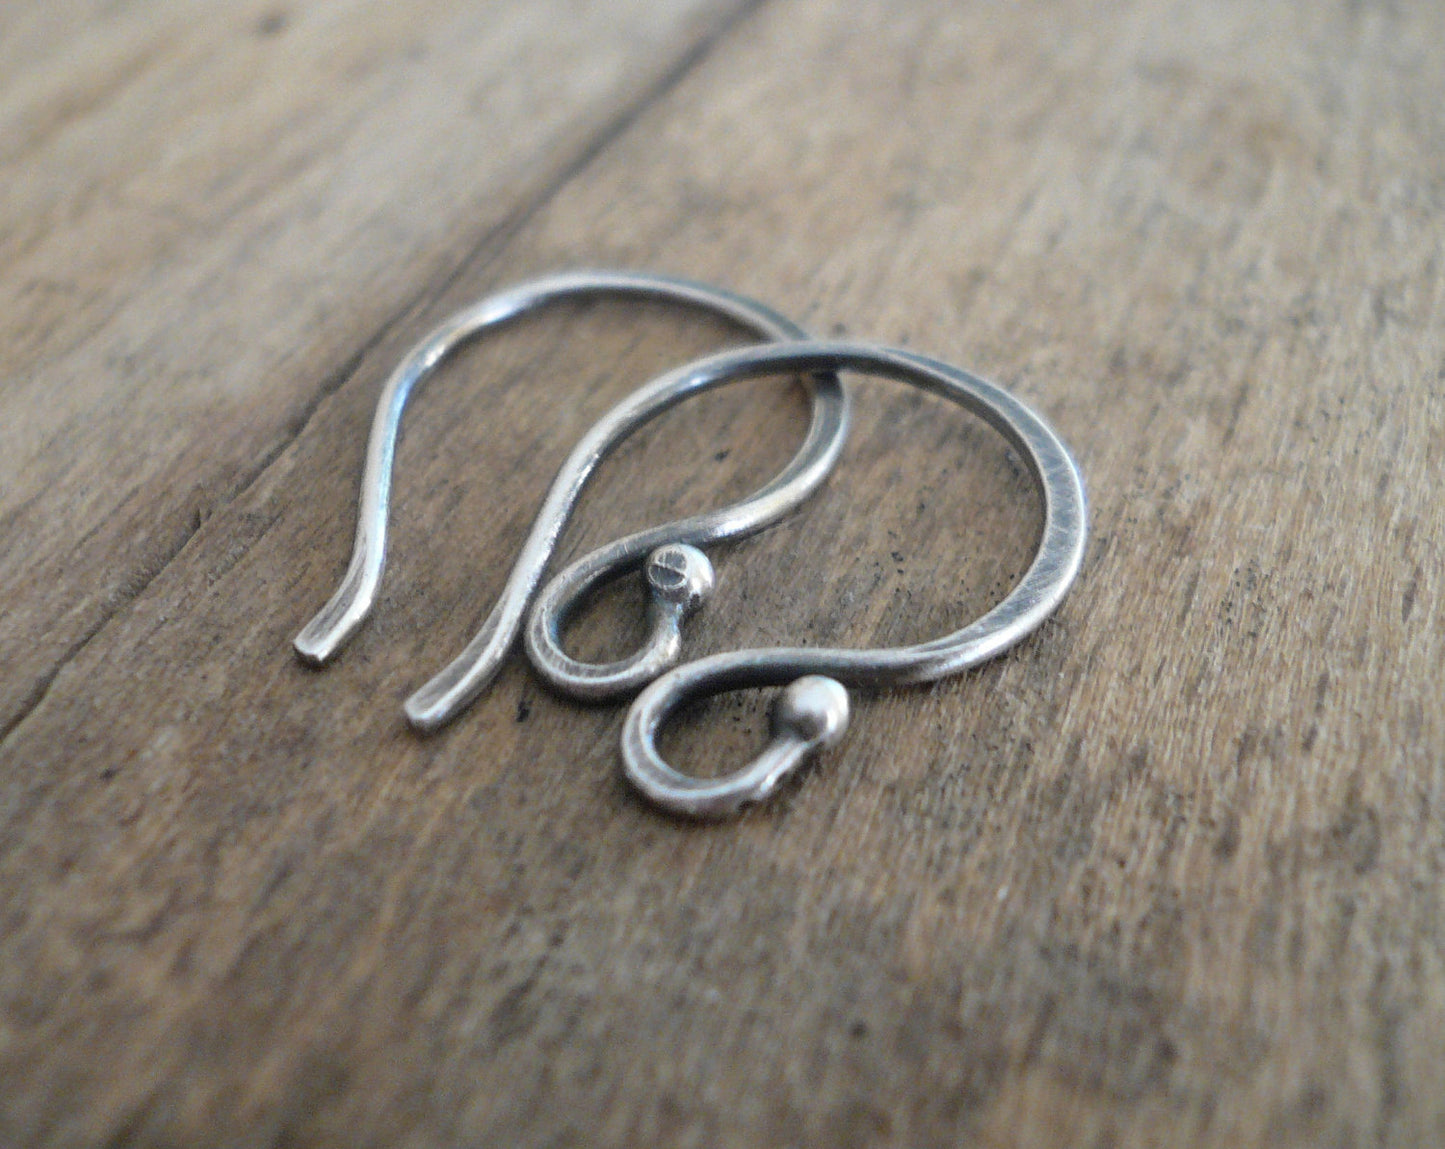 12 pairs Ball End Twinkle Fine Silver Earwires - Handmade. Handforged. Oxidized & polished